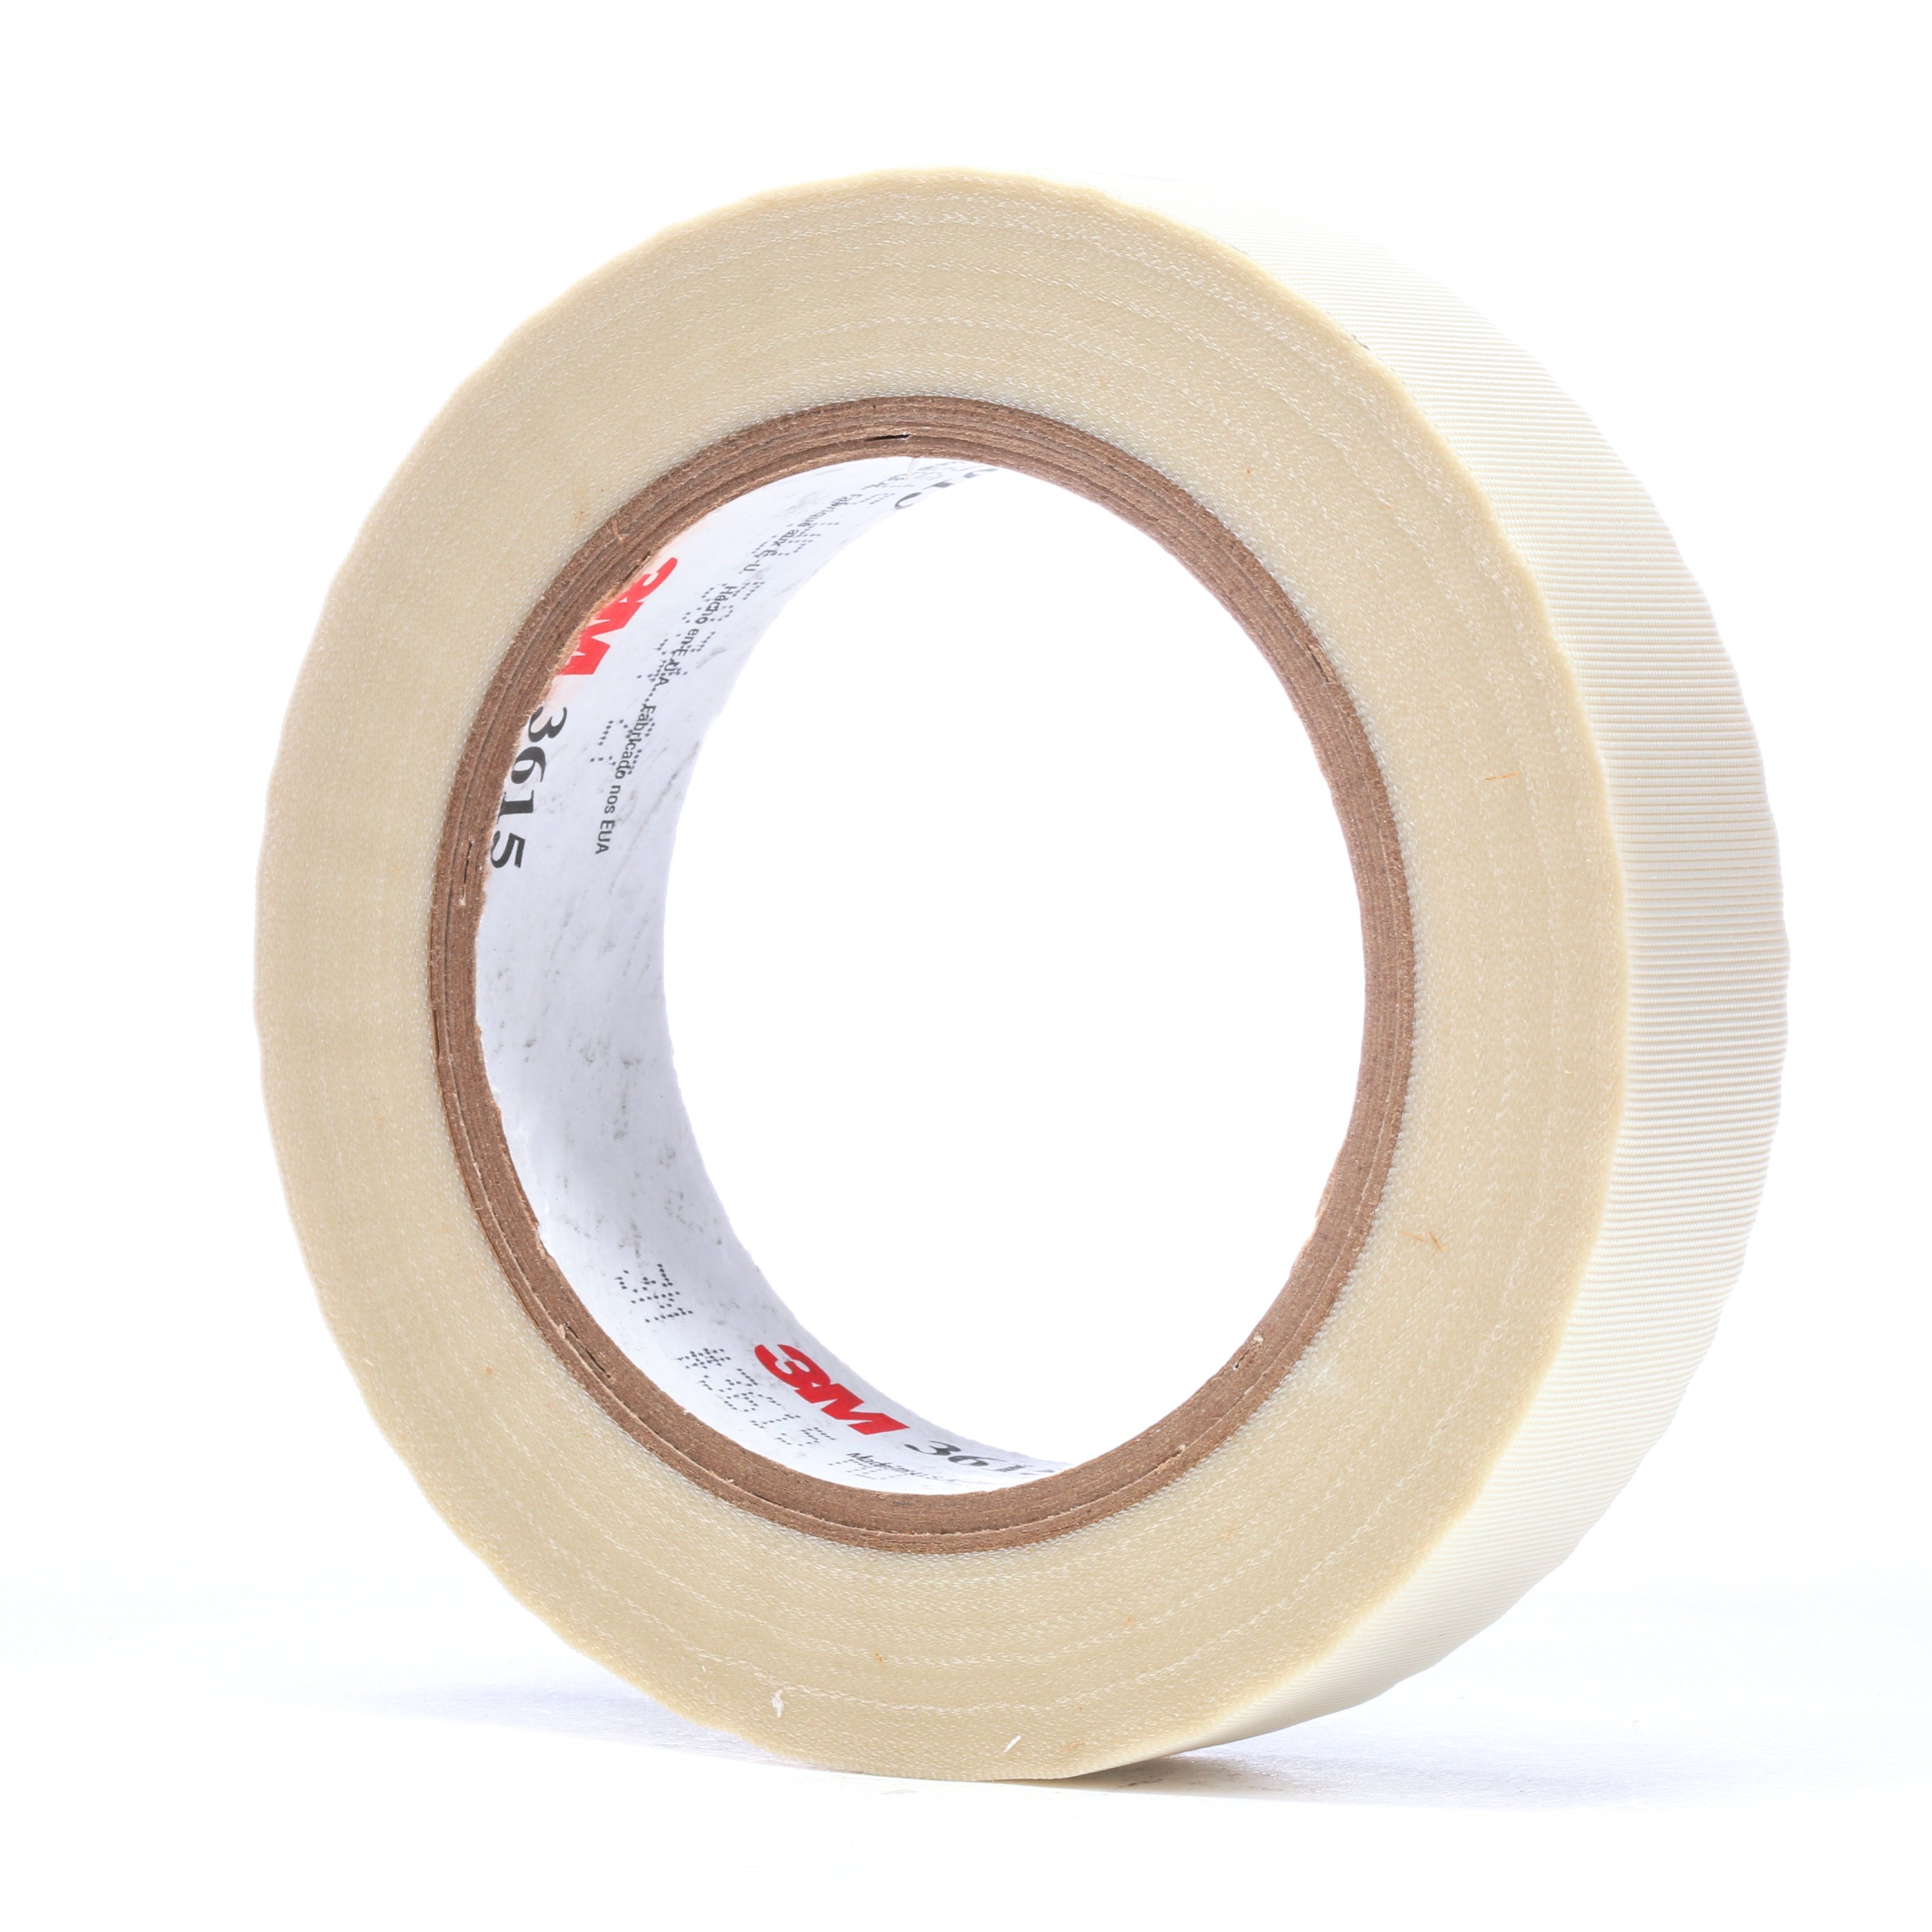 3M™ General Purpose Glass Cloth Tape 3615 is a strong and durable, fiberglass backed tape designed to perform at high temperatures